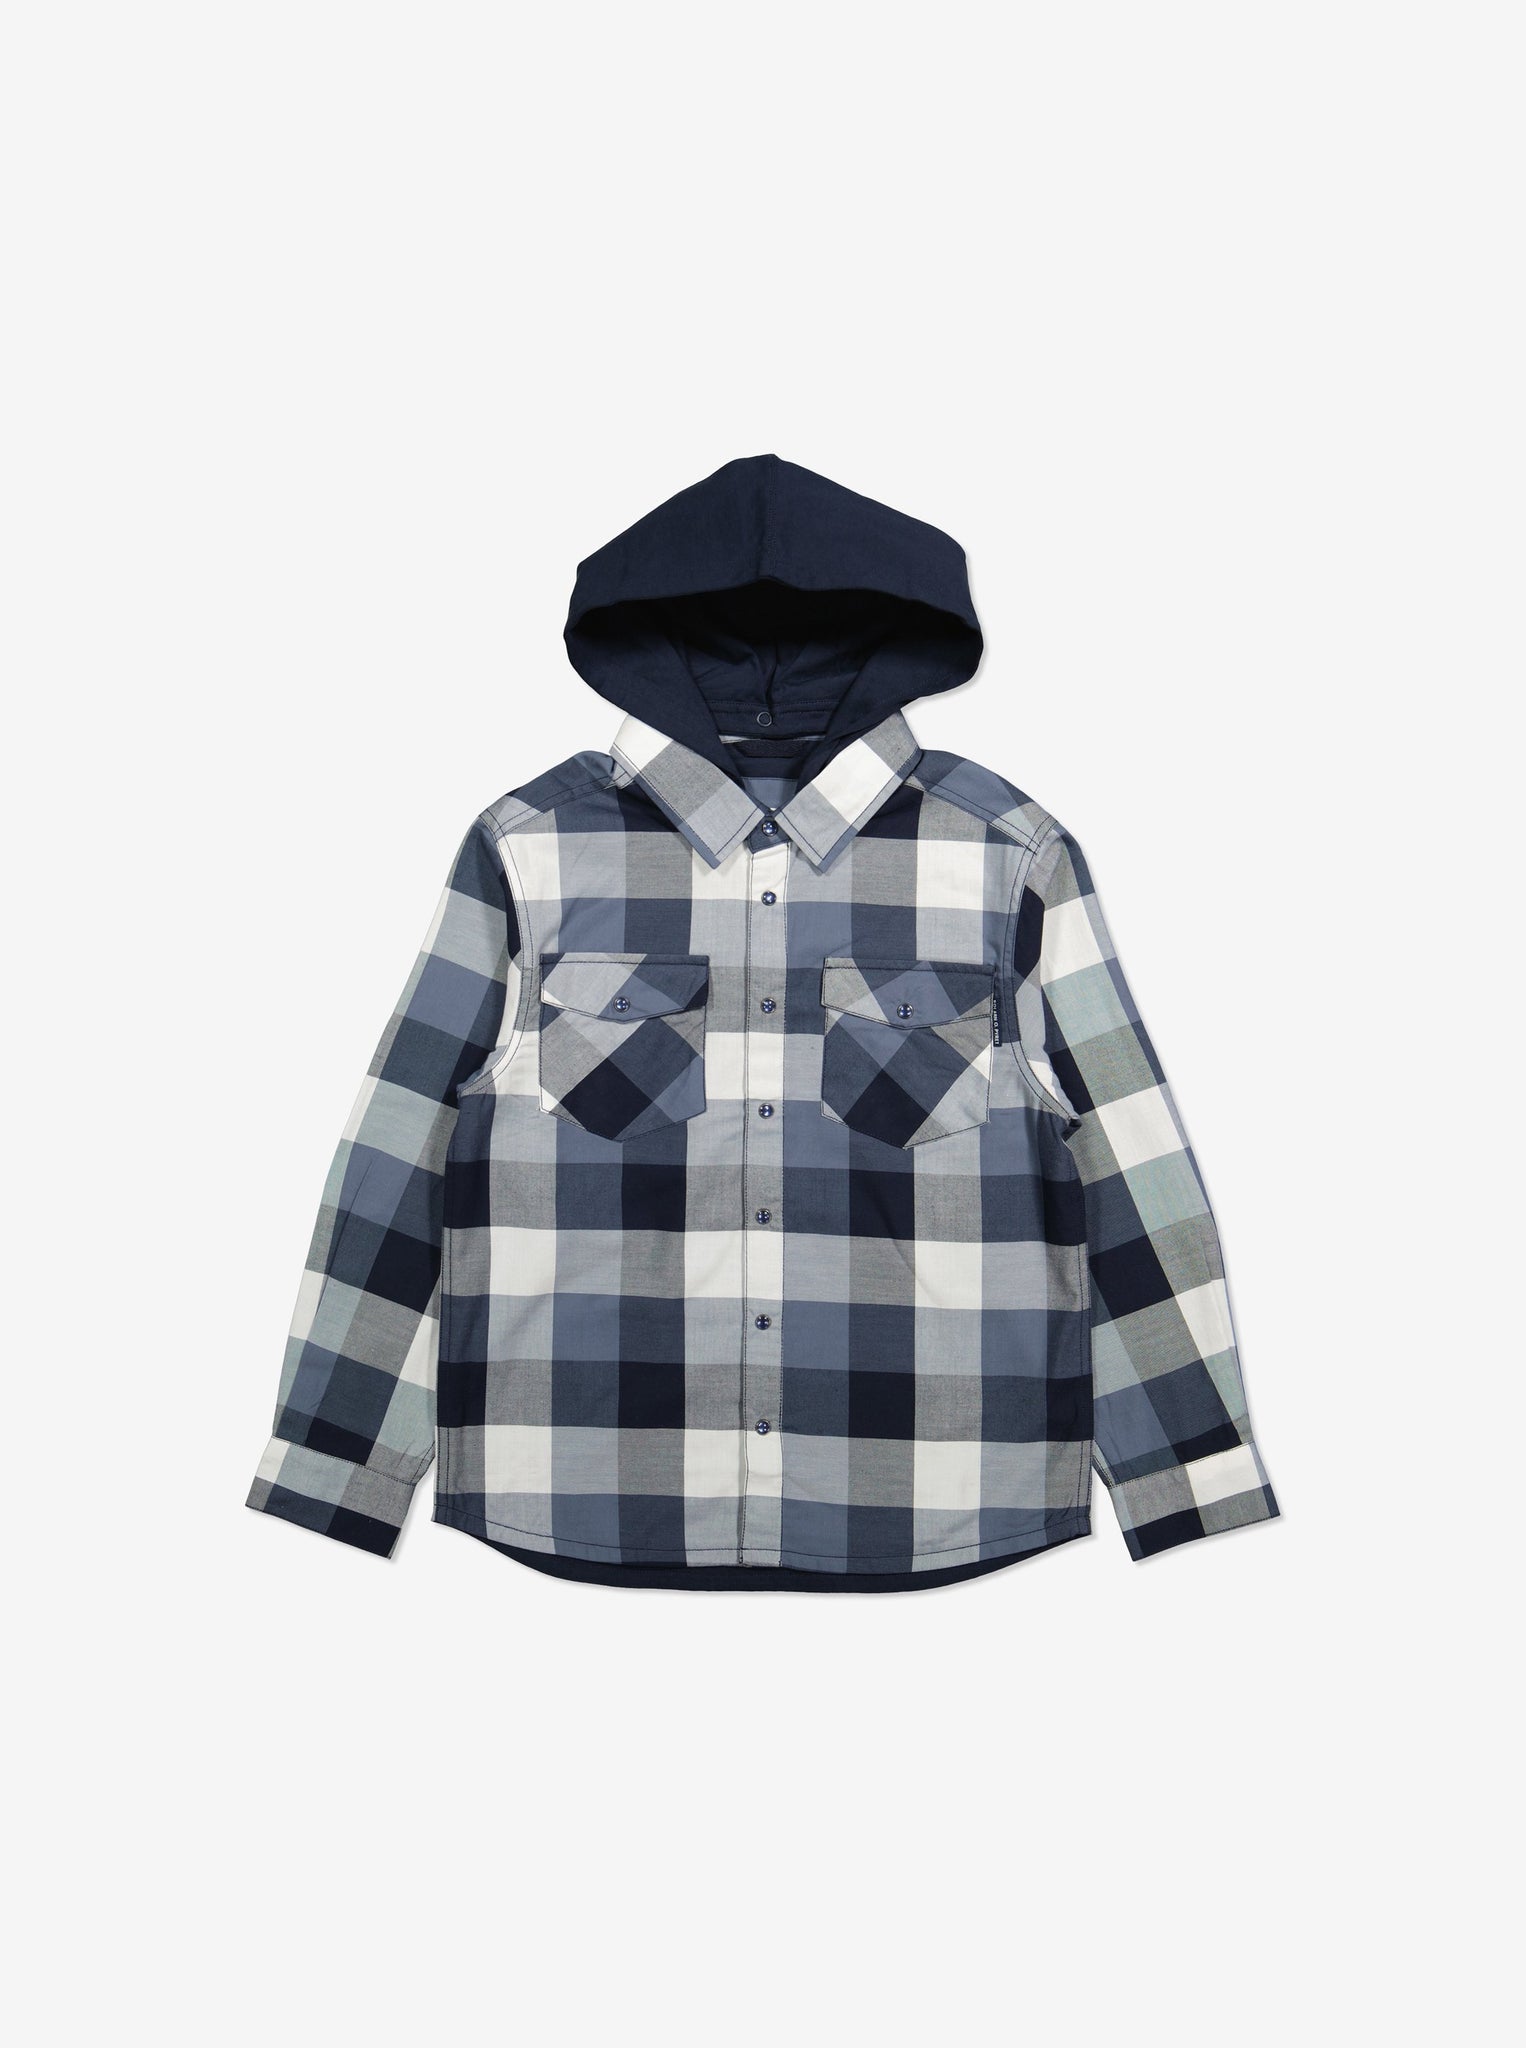  Organic Blue Kids Hooded Checked Shirt from Polarn O. Pyret Kidswear. Made from ethically sourced materials.